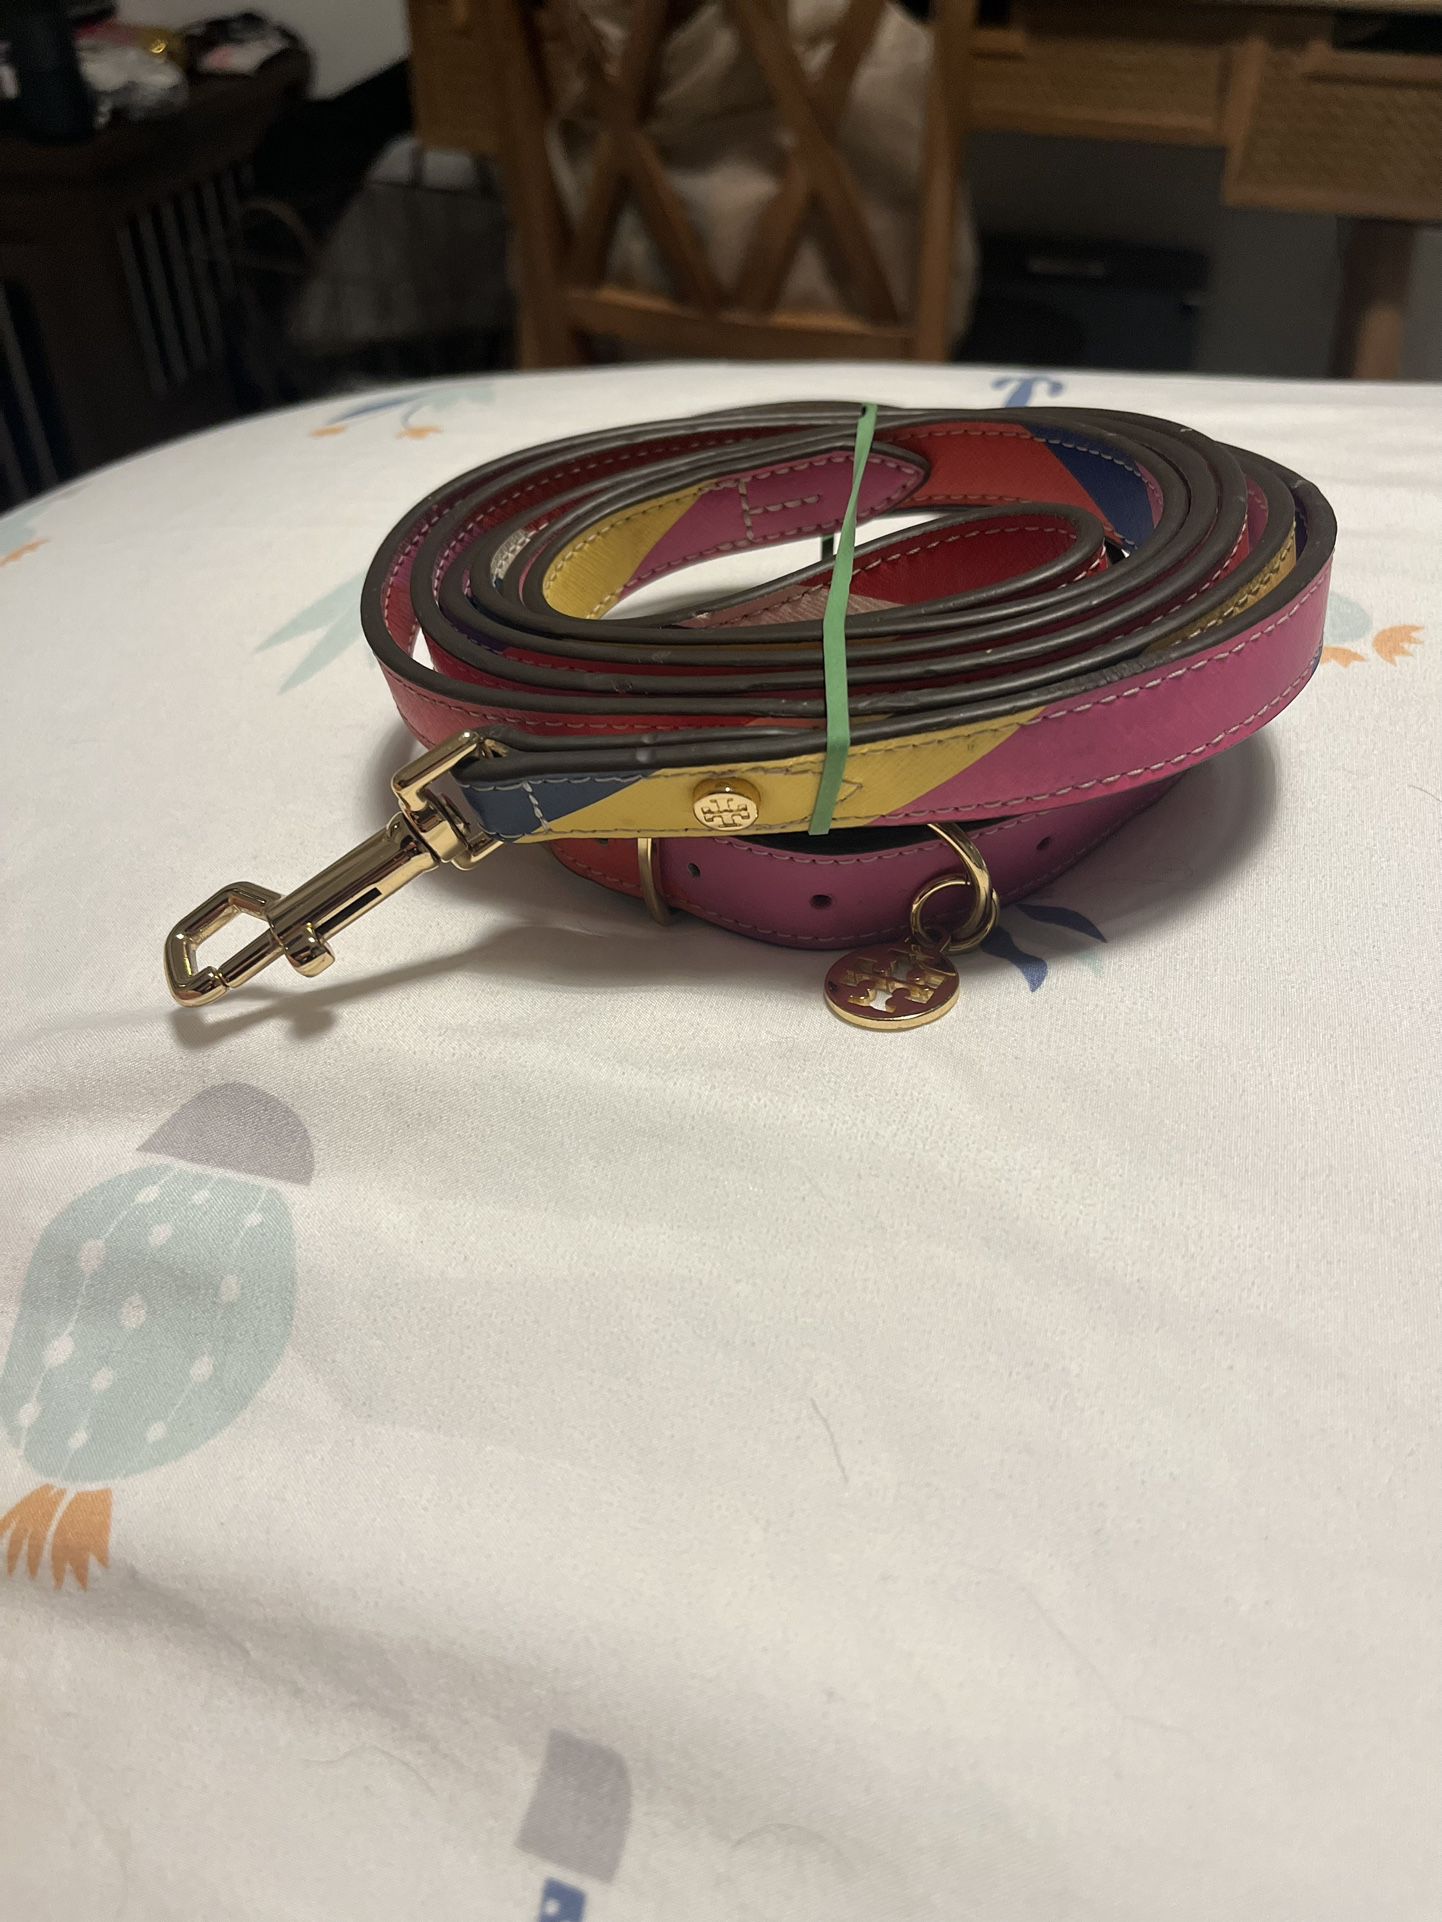 Fancy Dog Leash And Collar (Tory Burch) for Sale in Miami, FL - OfferUp